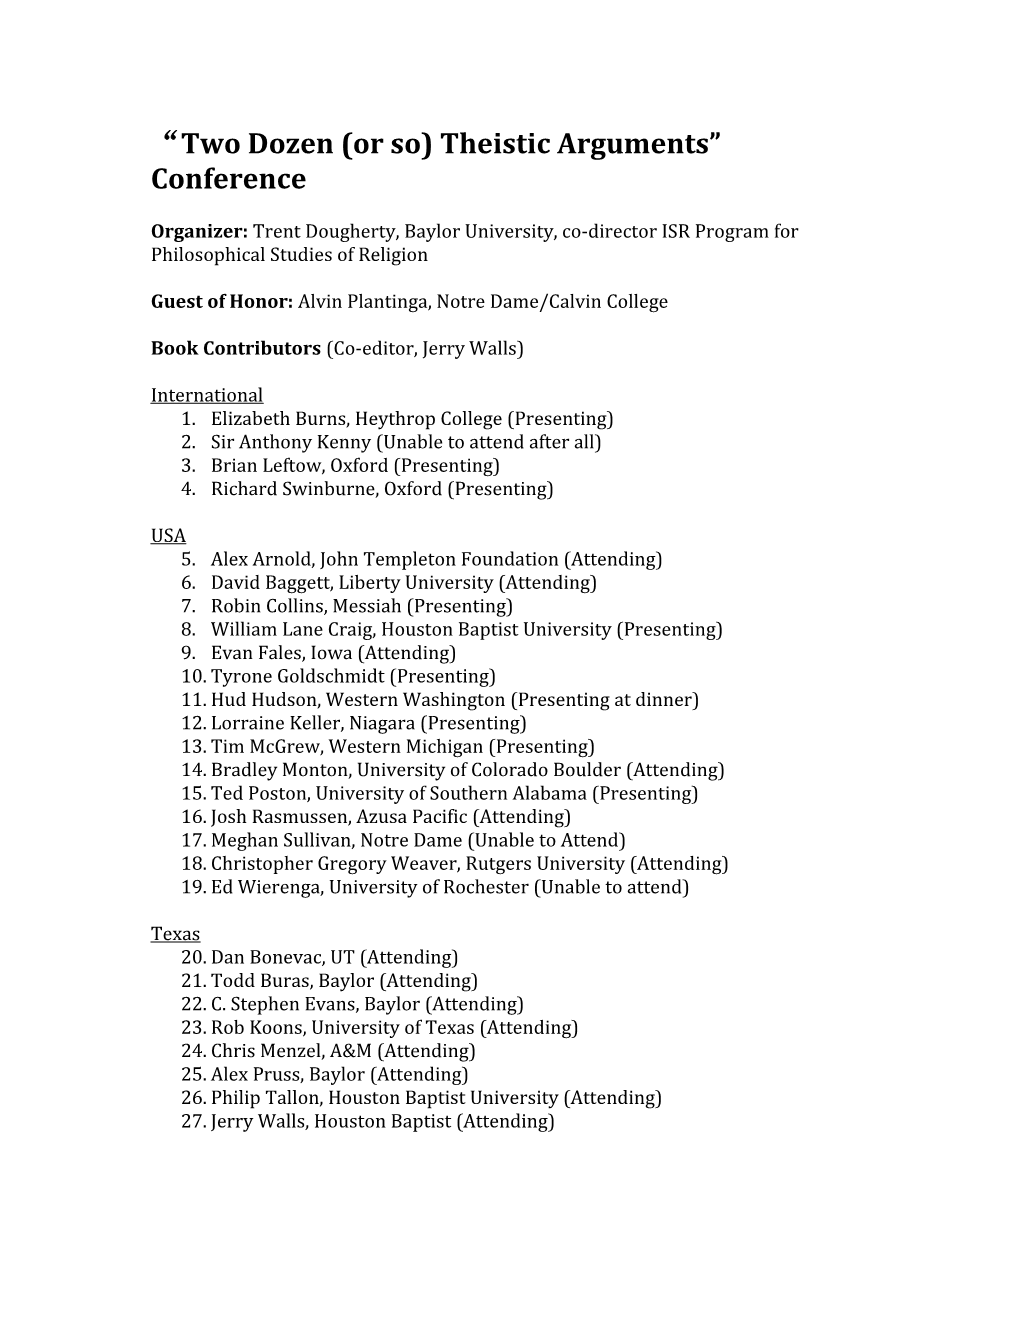 Two Dozen (Or So) Theistic Arguments Conference